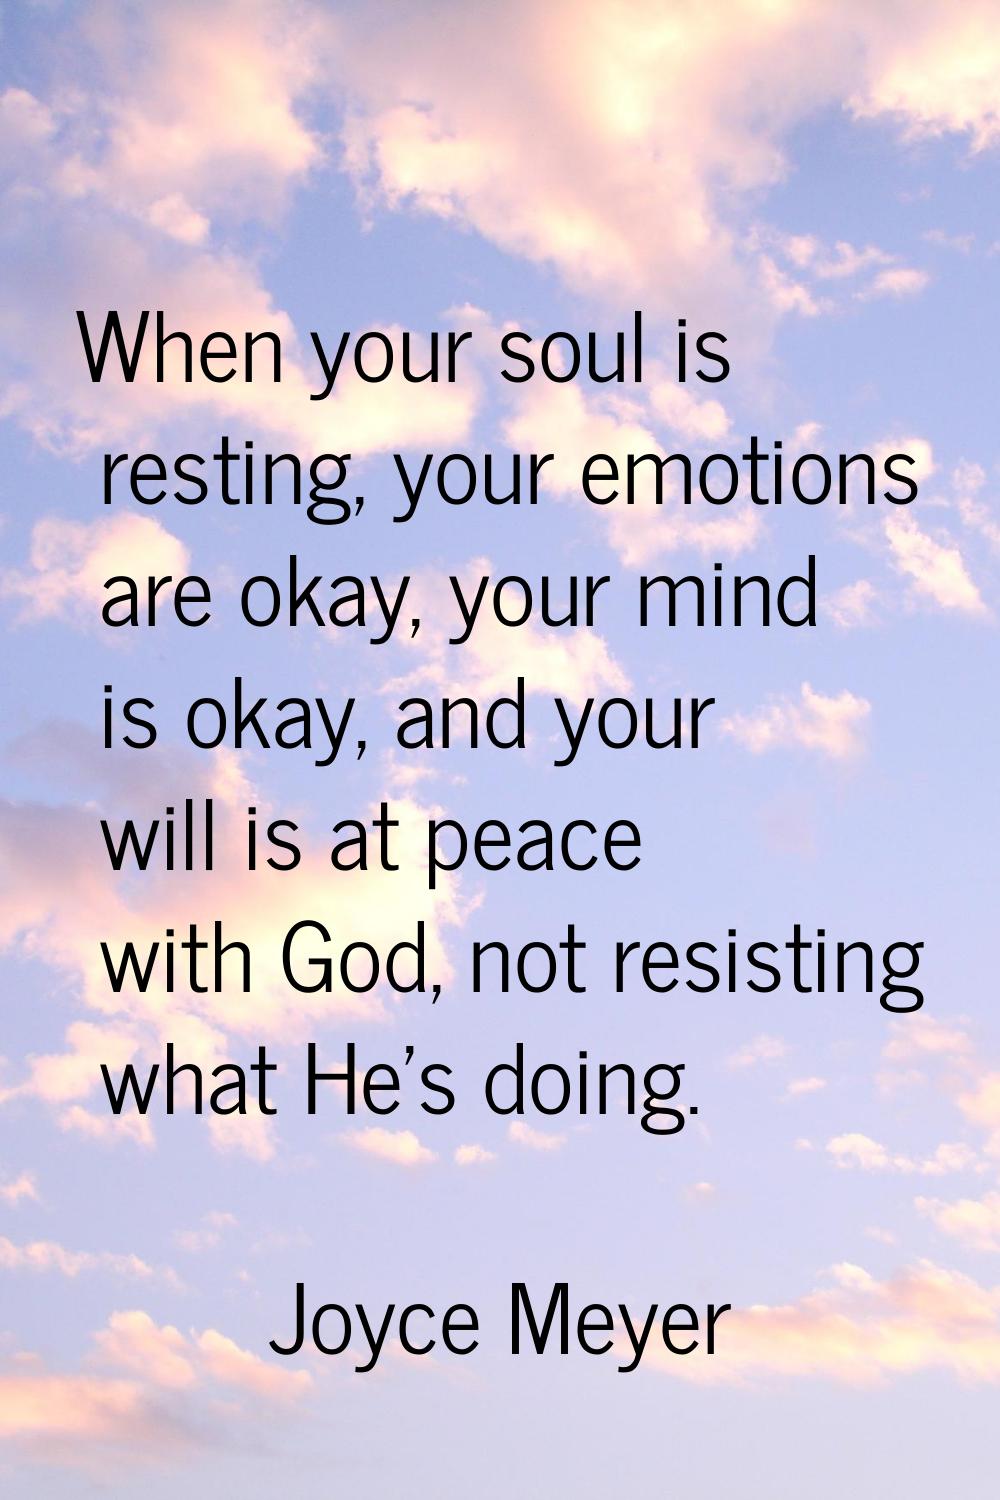 When your soul is resting, your emotions are okay, your mind is okay, and your will is at peace wit